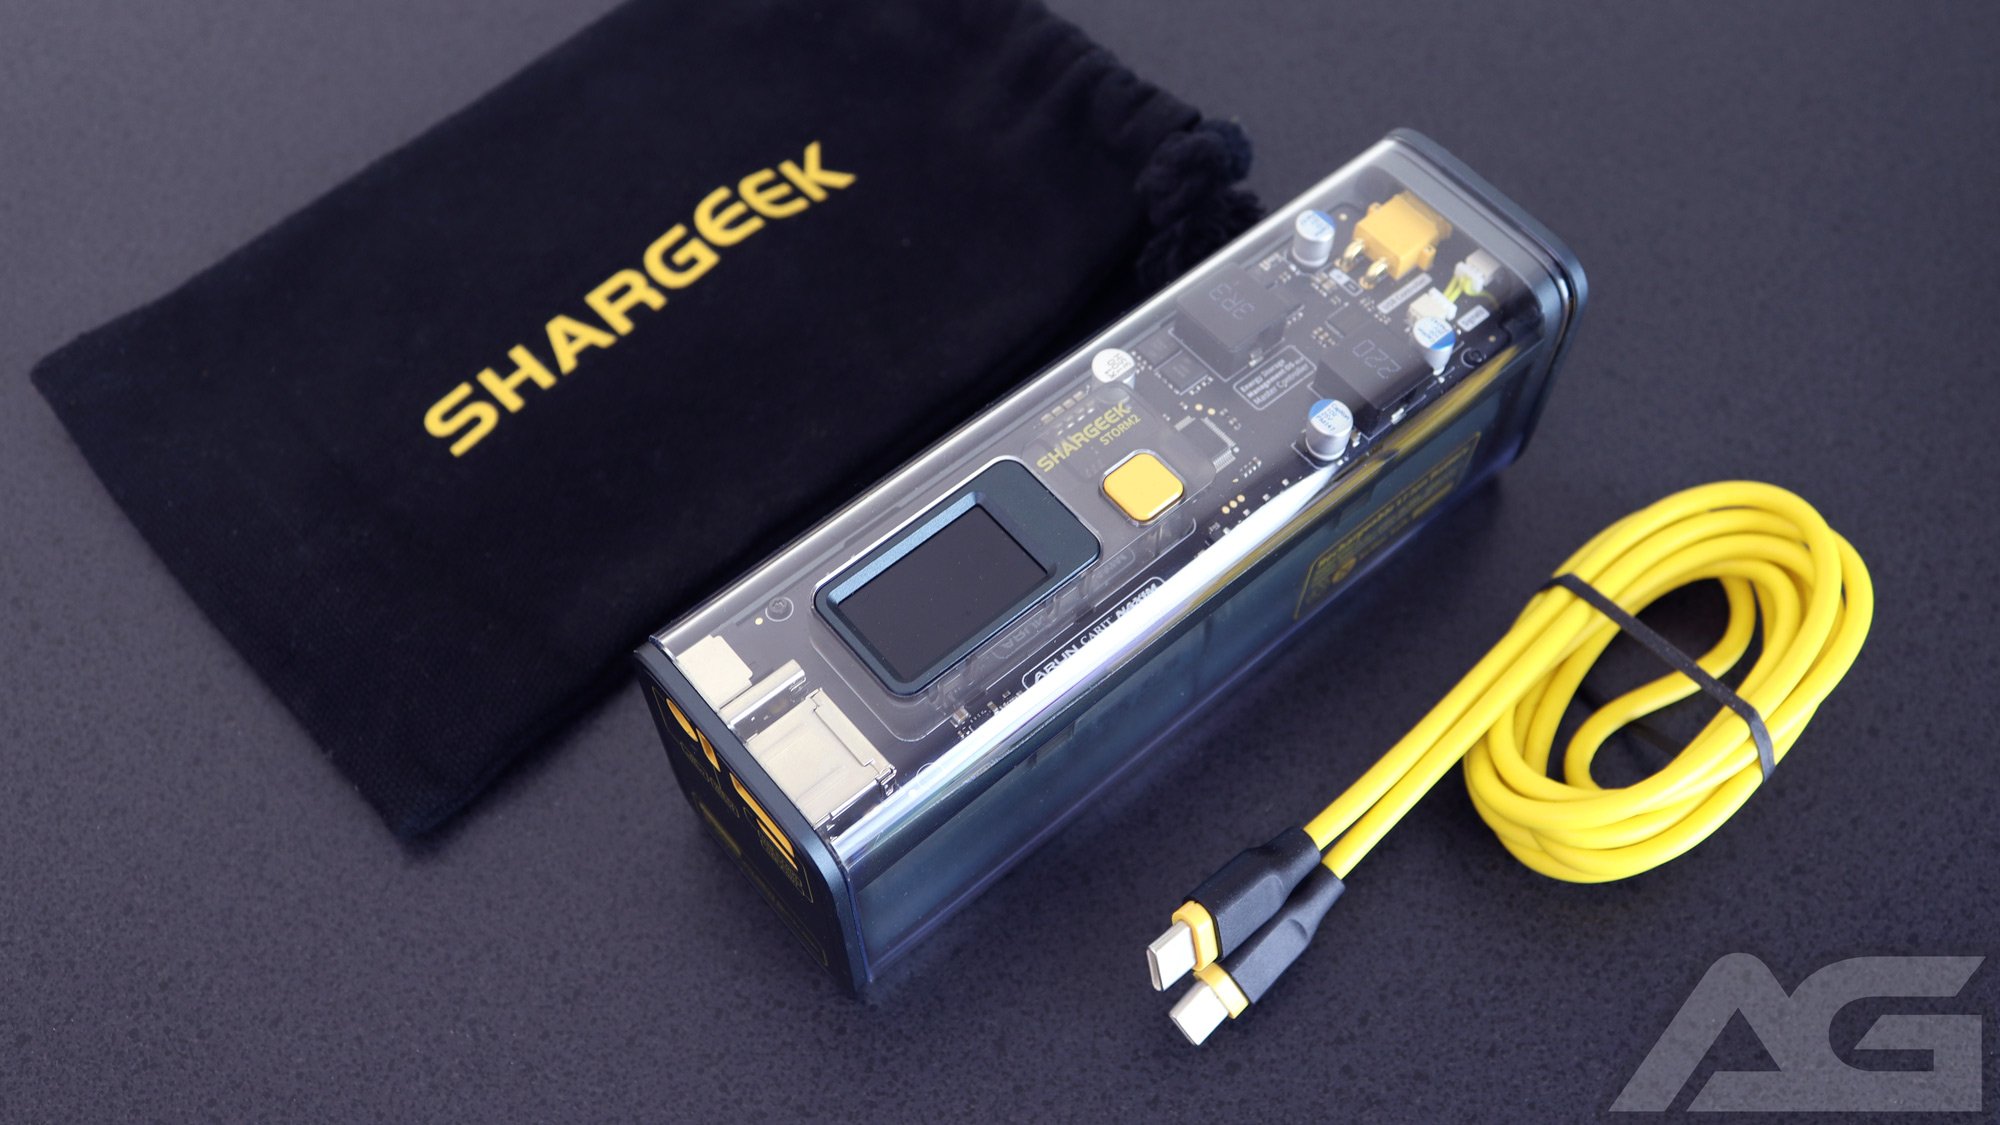 Shargeek Storm 2 Power Bank and Storm 2 Solar Panel review